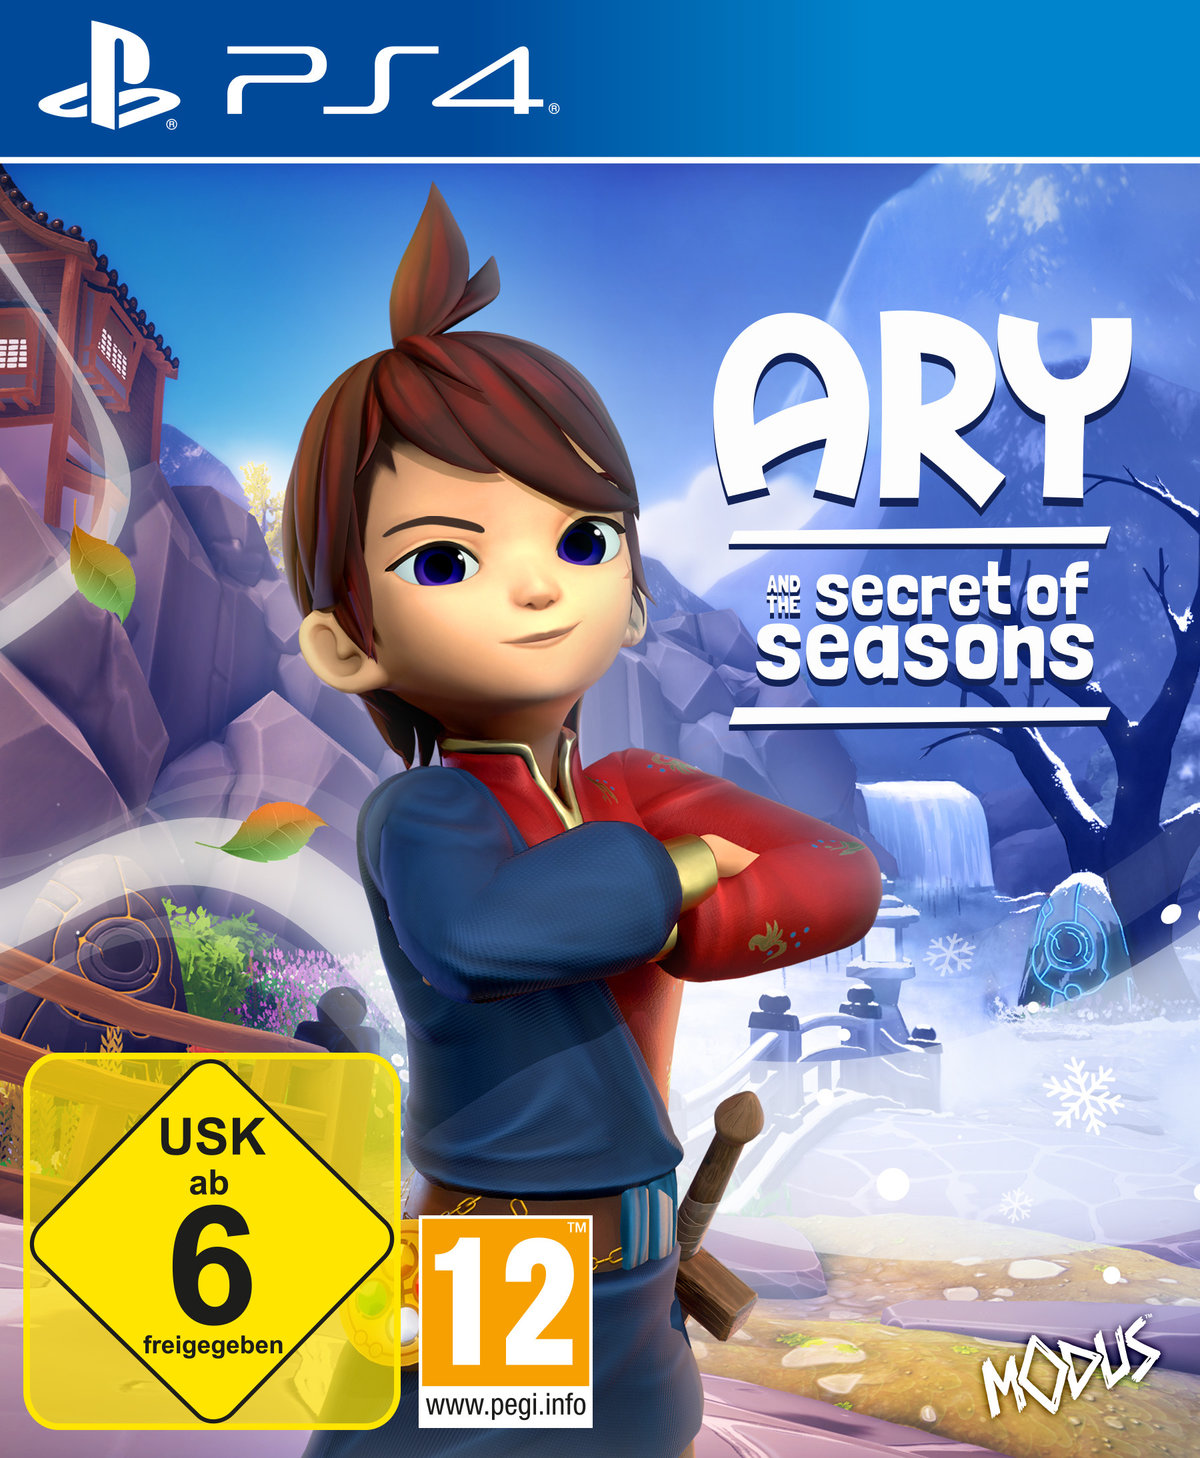 Seasons the and Secret - PS-4 4] Ary [PlayStation of